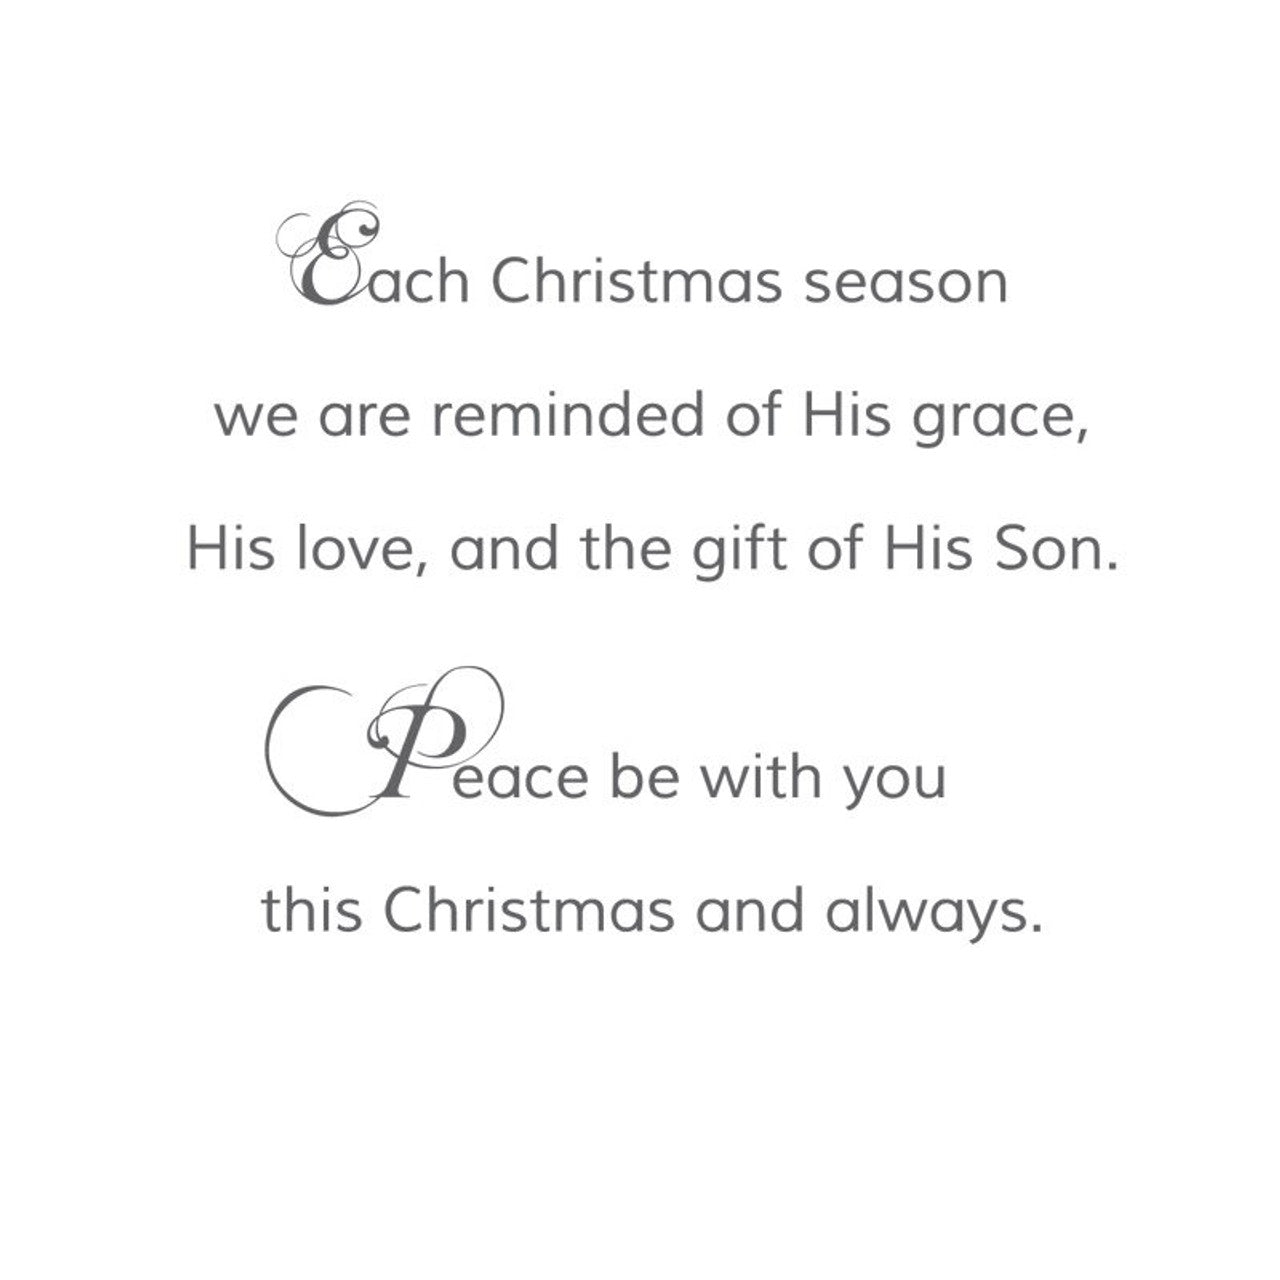 God's Gift of Love Christmas Cards